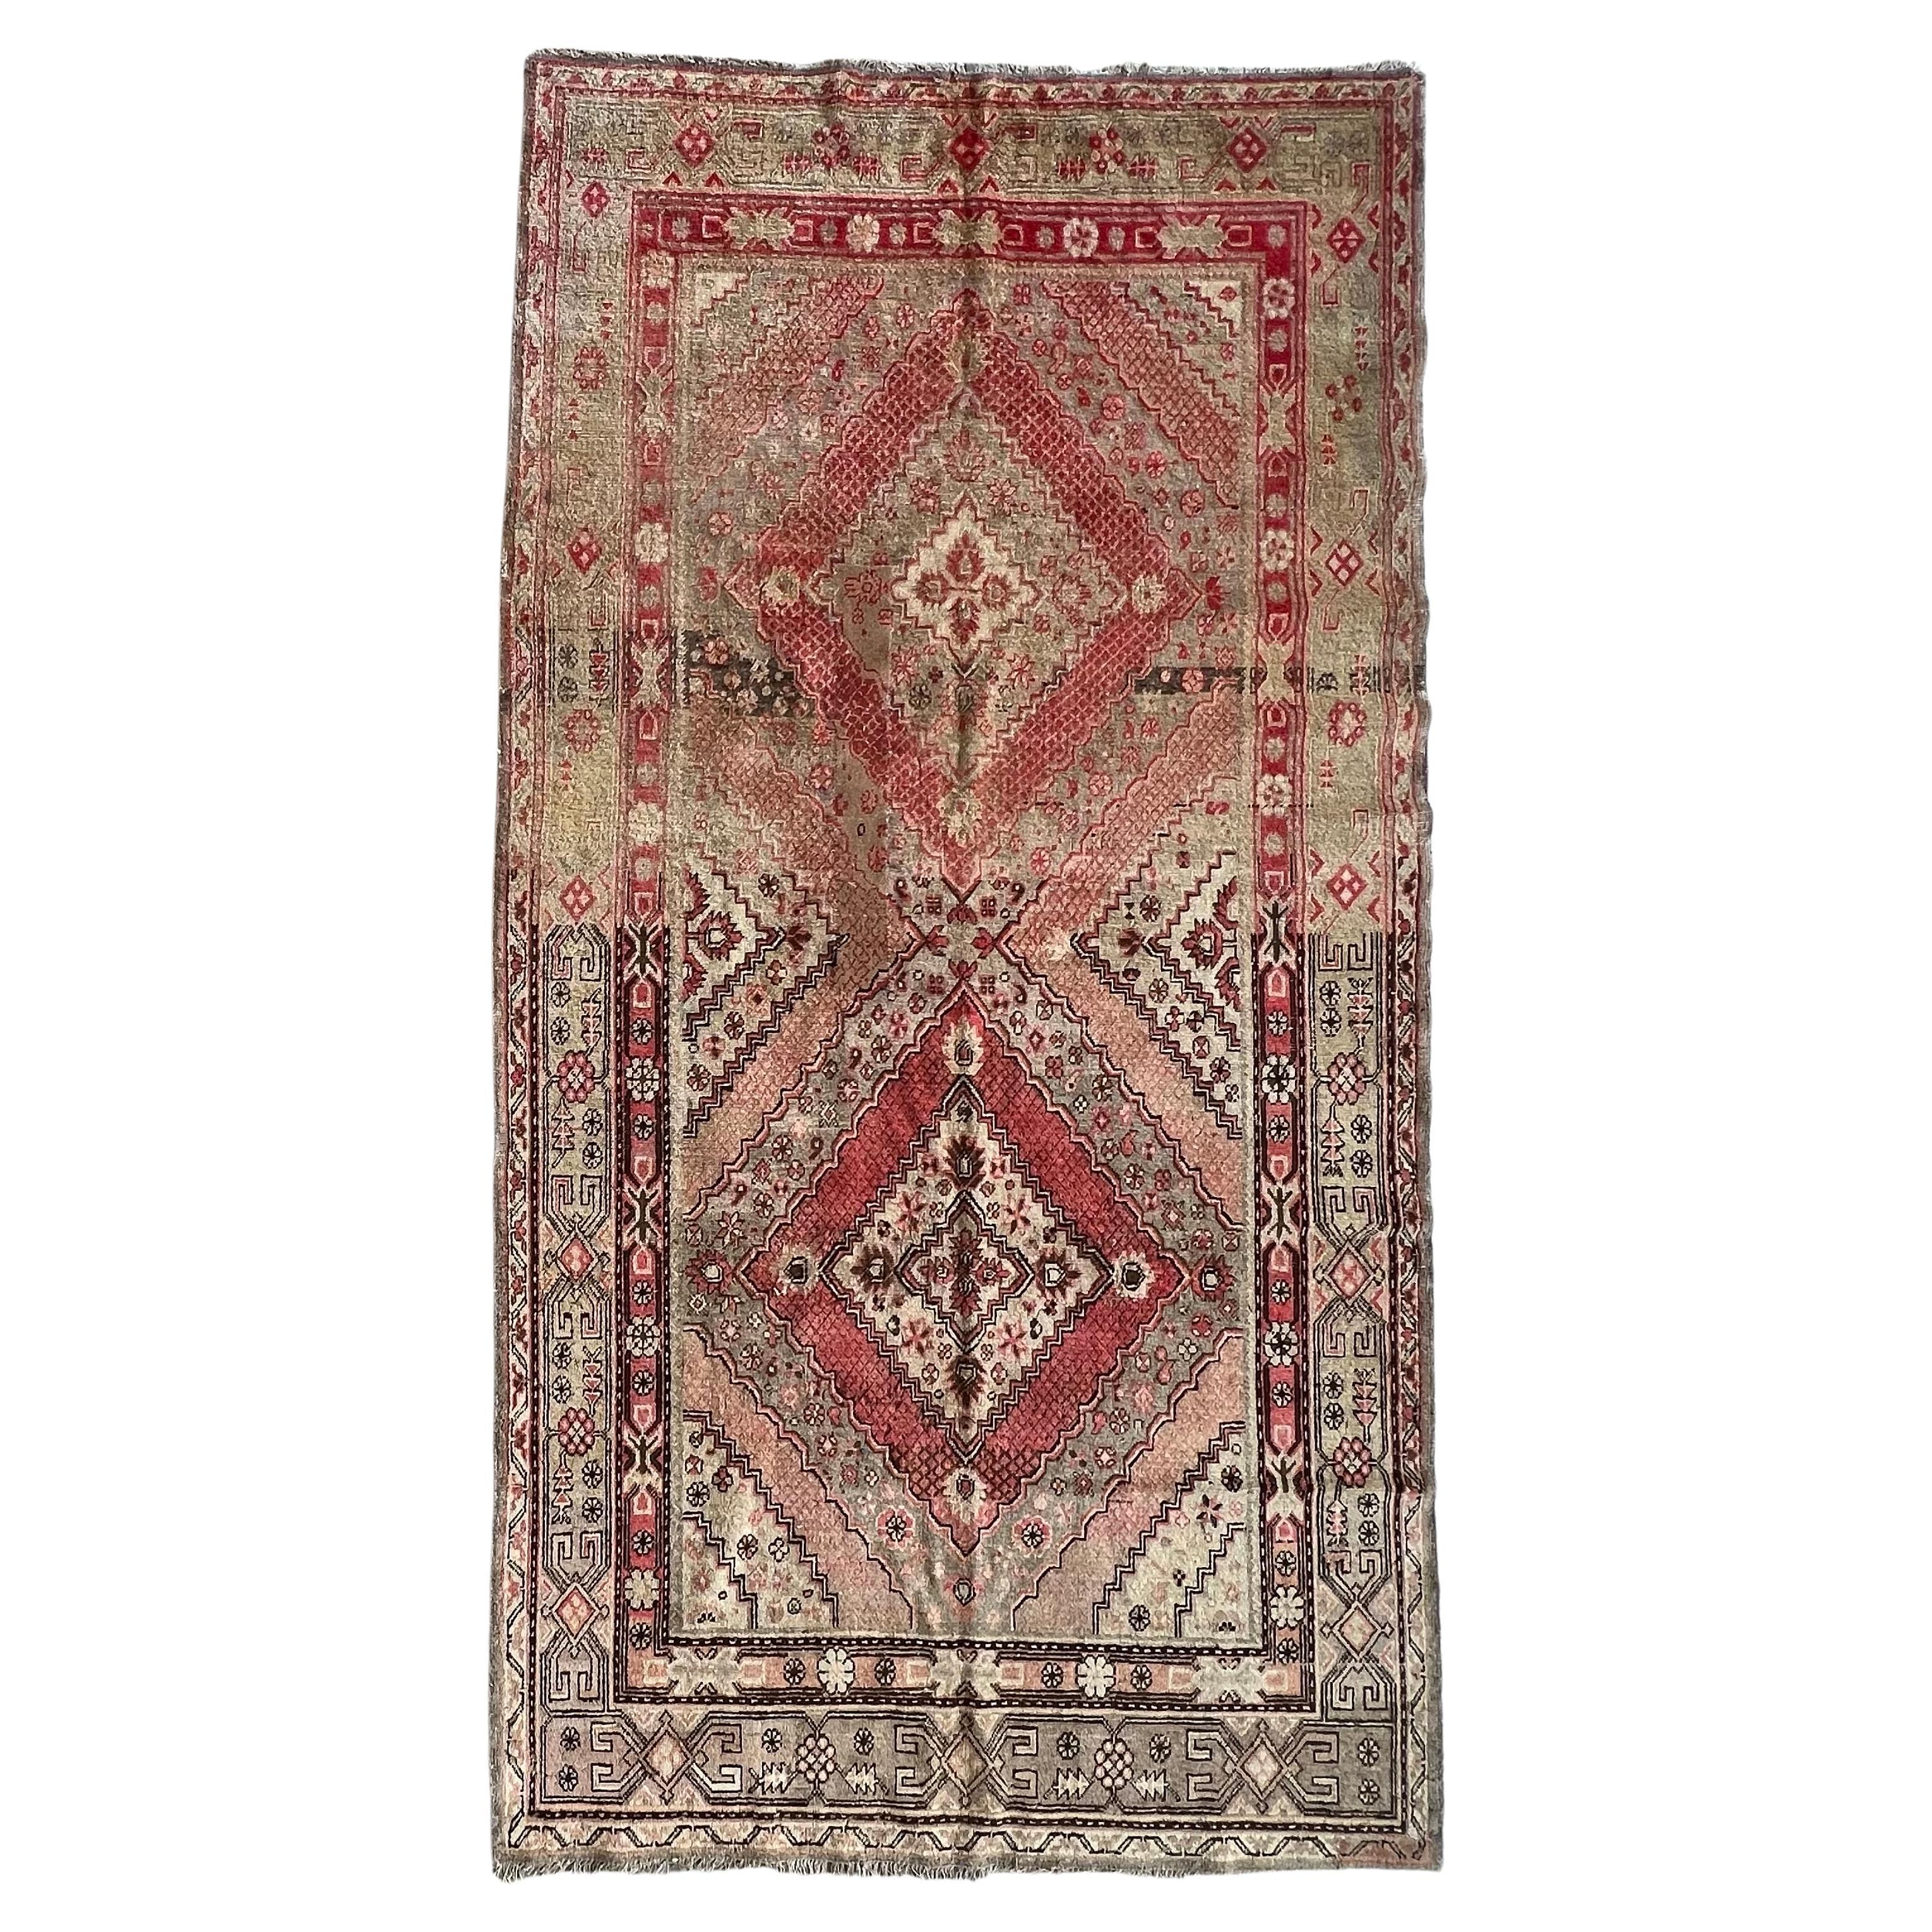 Early 20th Century Antique Khotan Hand Knotted Wool Rug, with Pink Abrash, 1910